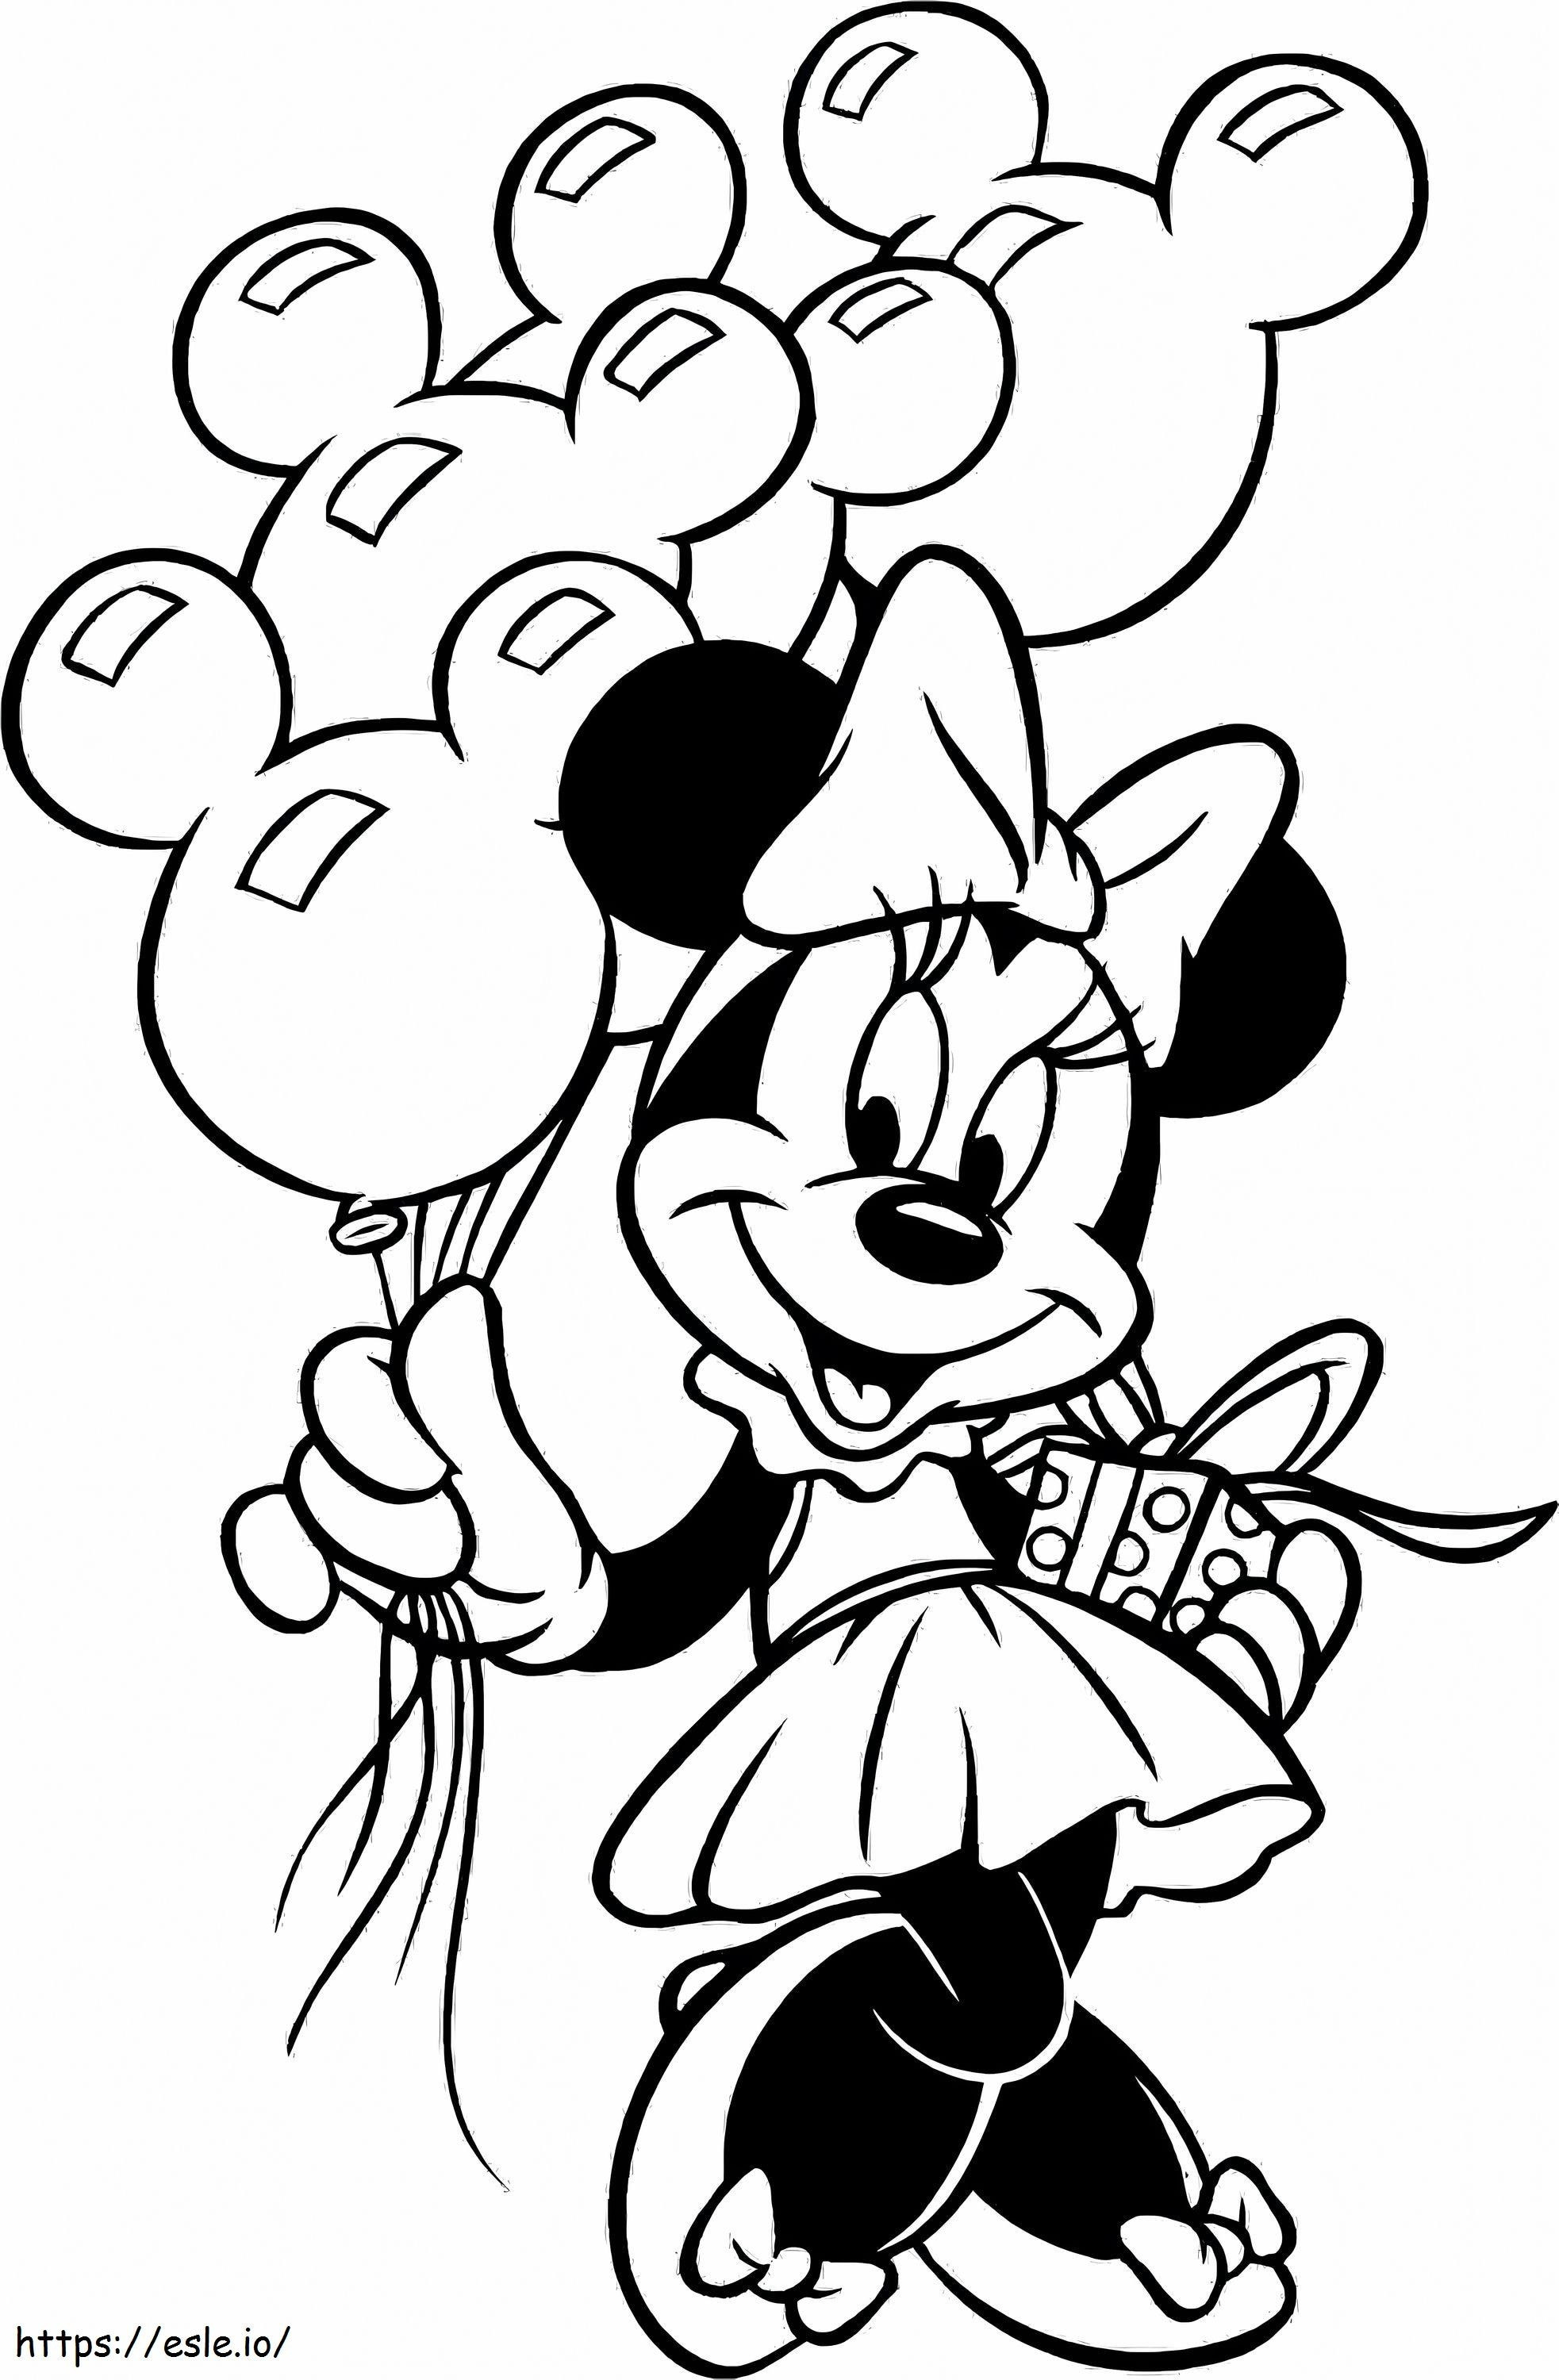 Minnie Mouse Holding Balloon coloring page